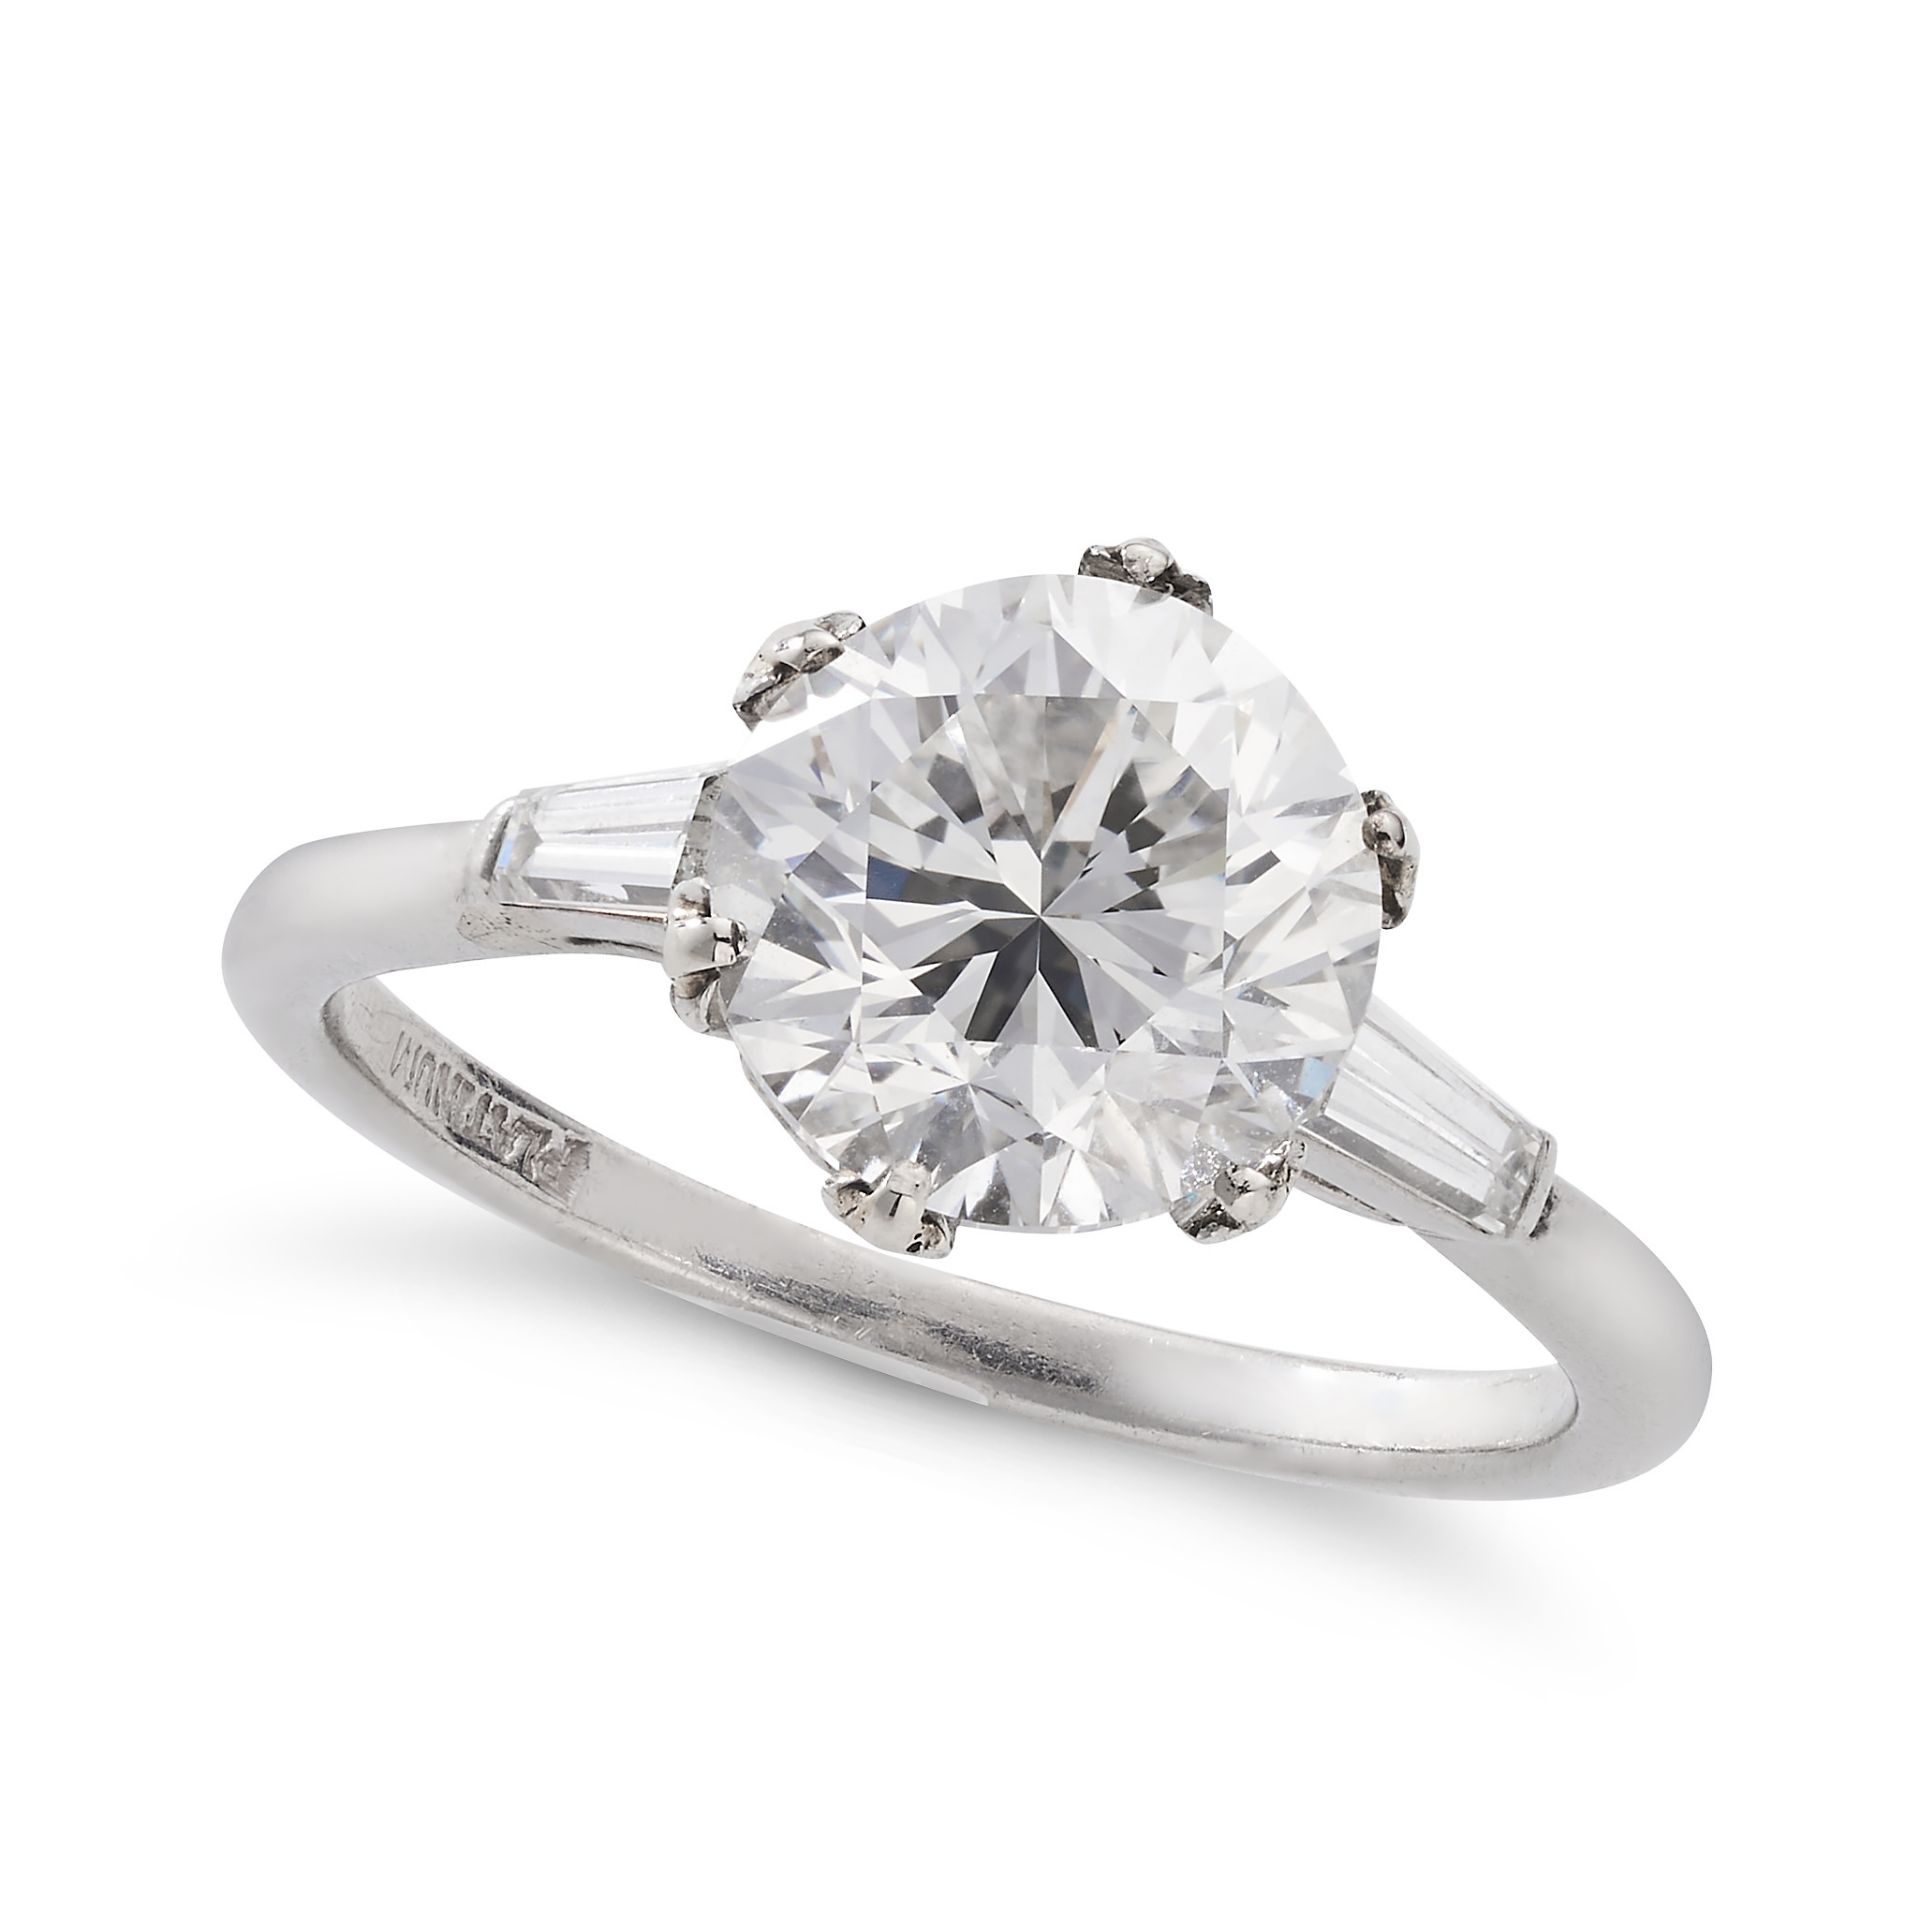 A 3.02 CARAT SOLITAIRE DIAMOND ENGAGEMENT RING in platinum, set with a round brilliant cut diamon...